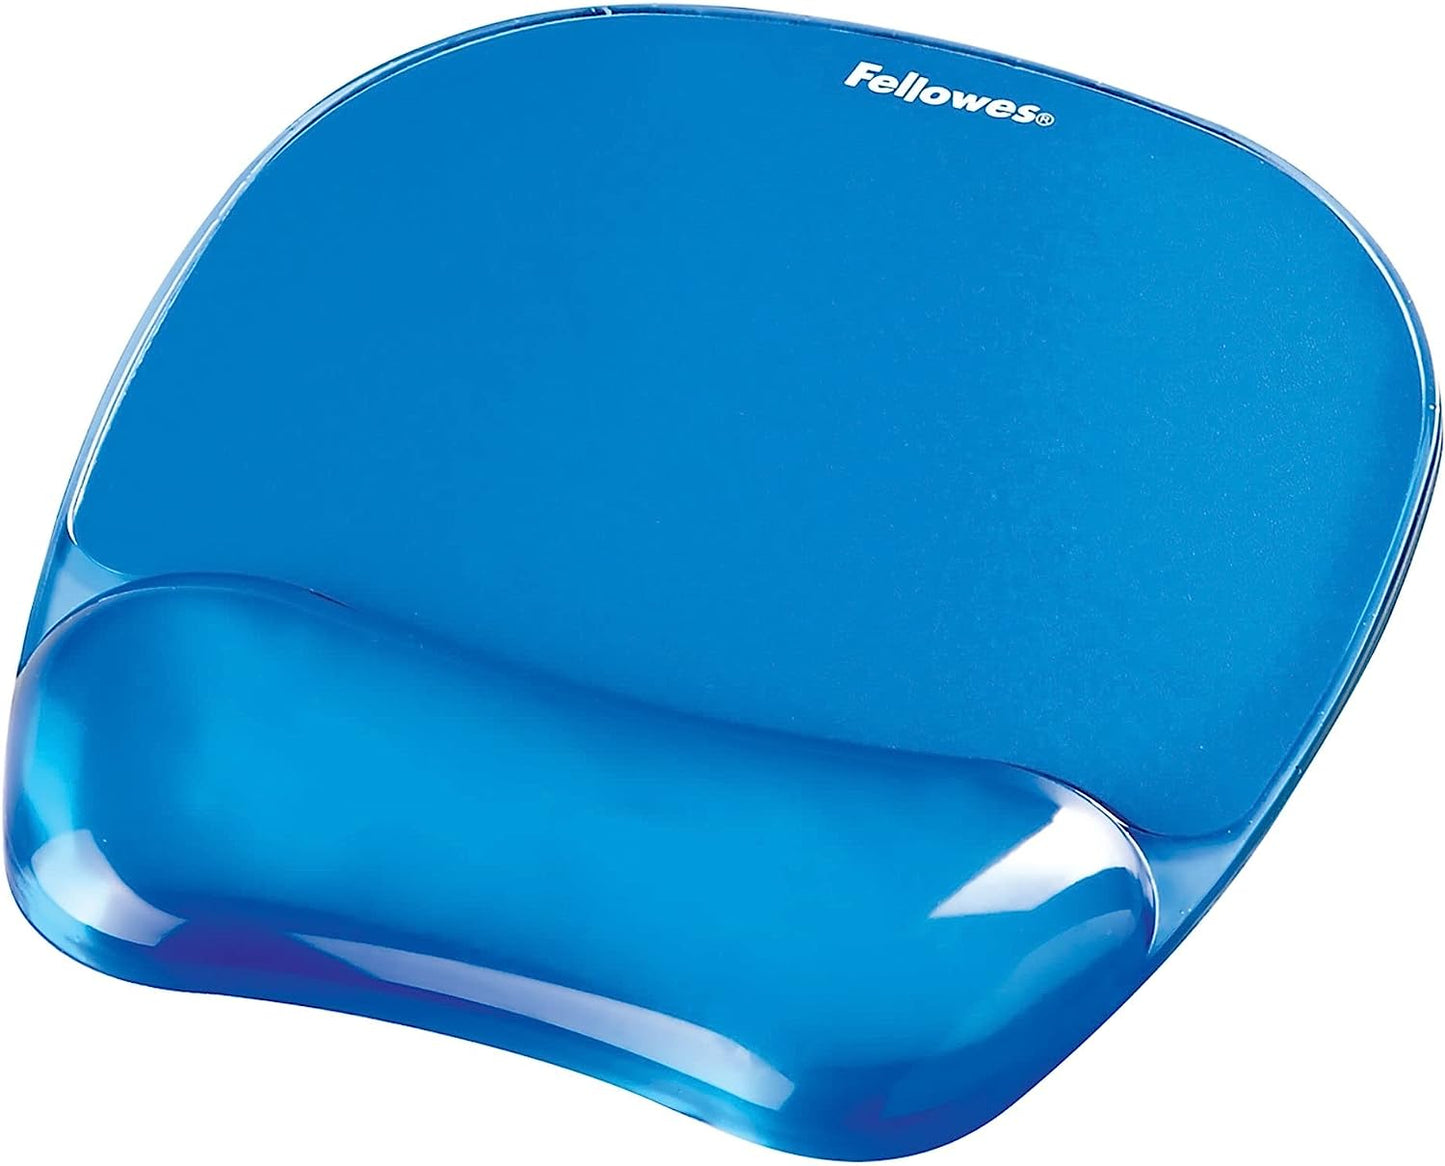 Fellowes Mouse Mat Wrist Support - Crystals Gel Mouse Pad with Non Slip Rubber Base - Ergonomic Mouse Mat for Computer, Laptop, Home Office Use - Compatible with Laser and Optical Mice